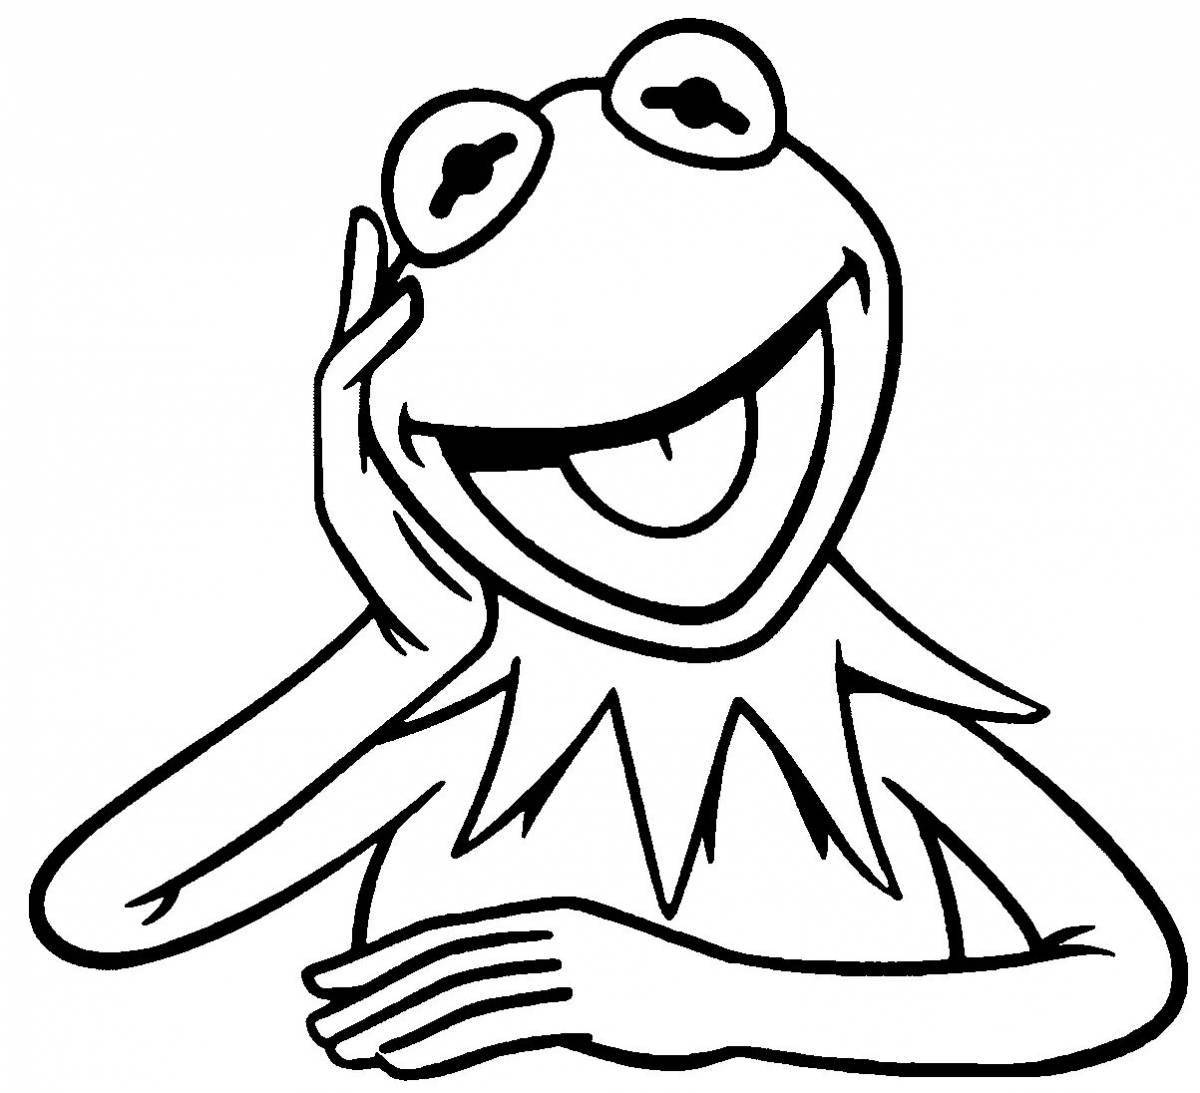 Funny frog meme coloring page